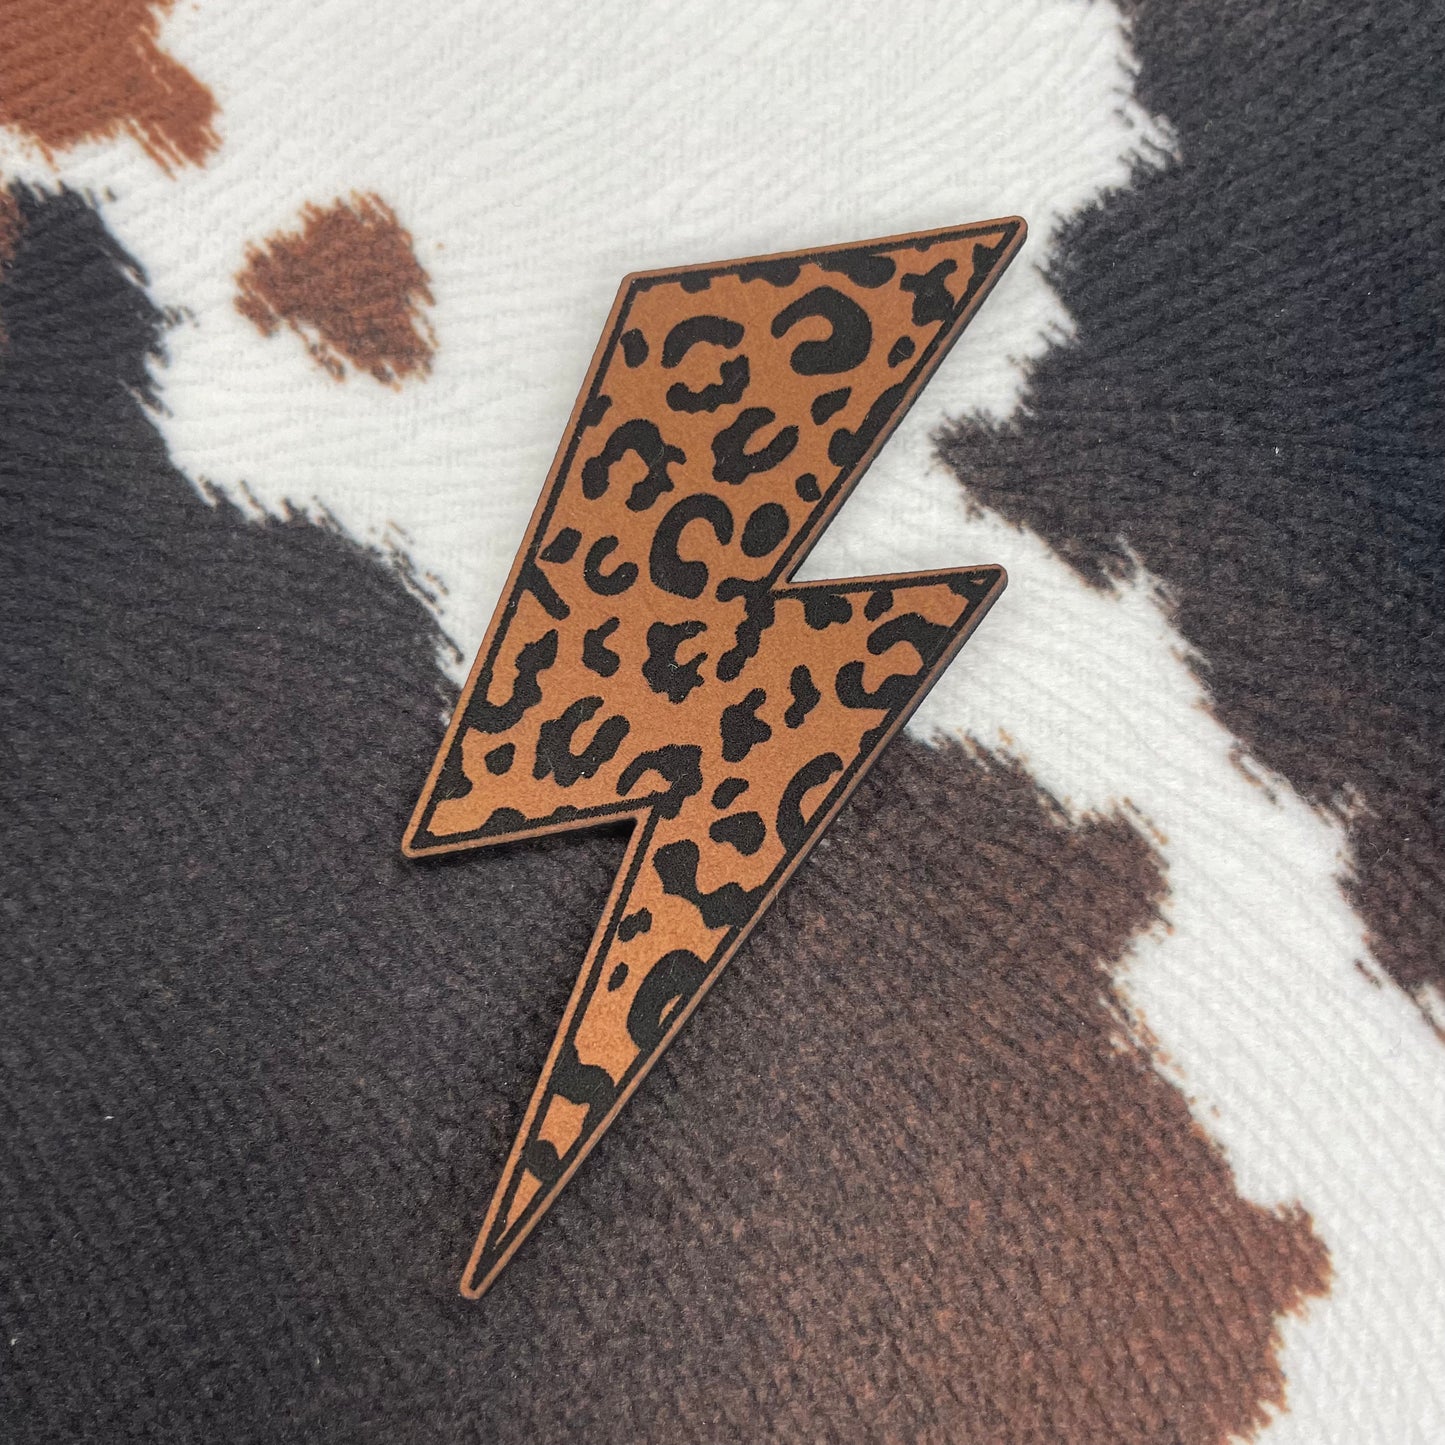 Leopard Lightning - 1.5" wide x 2.75" tall Leatherette Patch